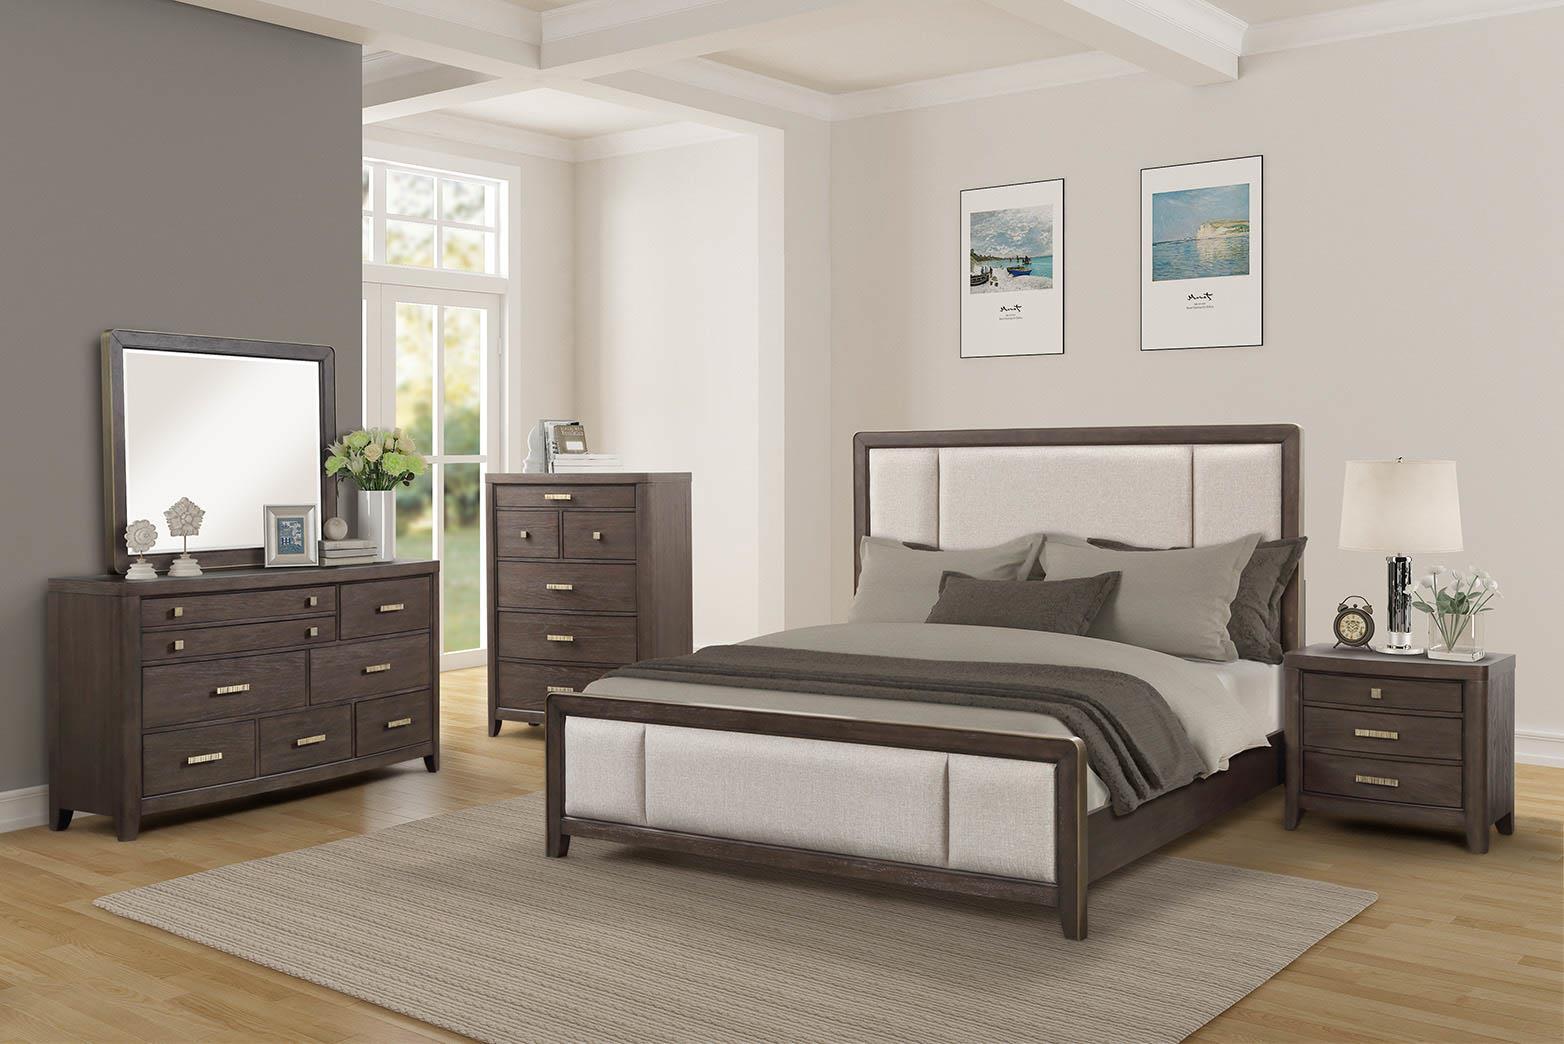 Classic, Transitional Panel Bed FULTON 1720-110 1720-110 in Taupe Microfiber